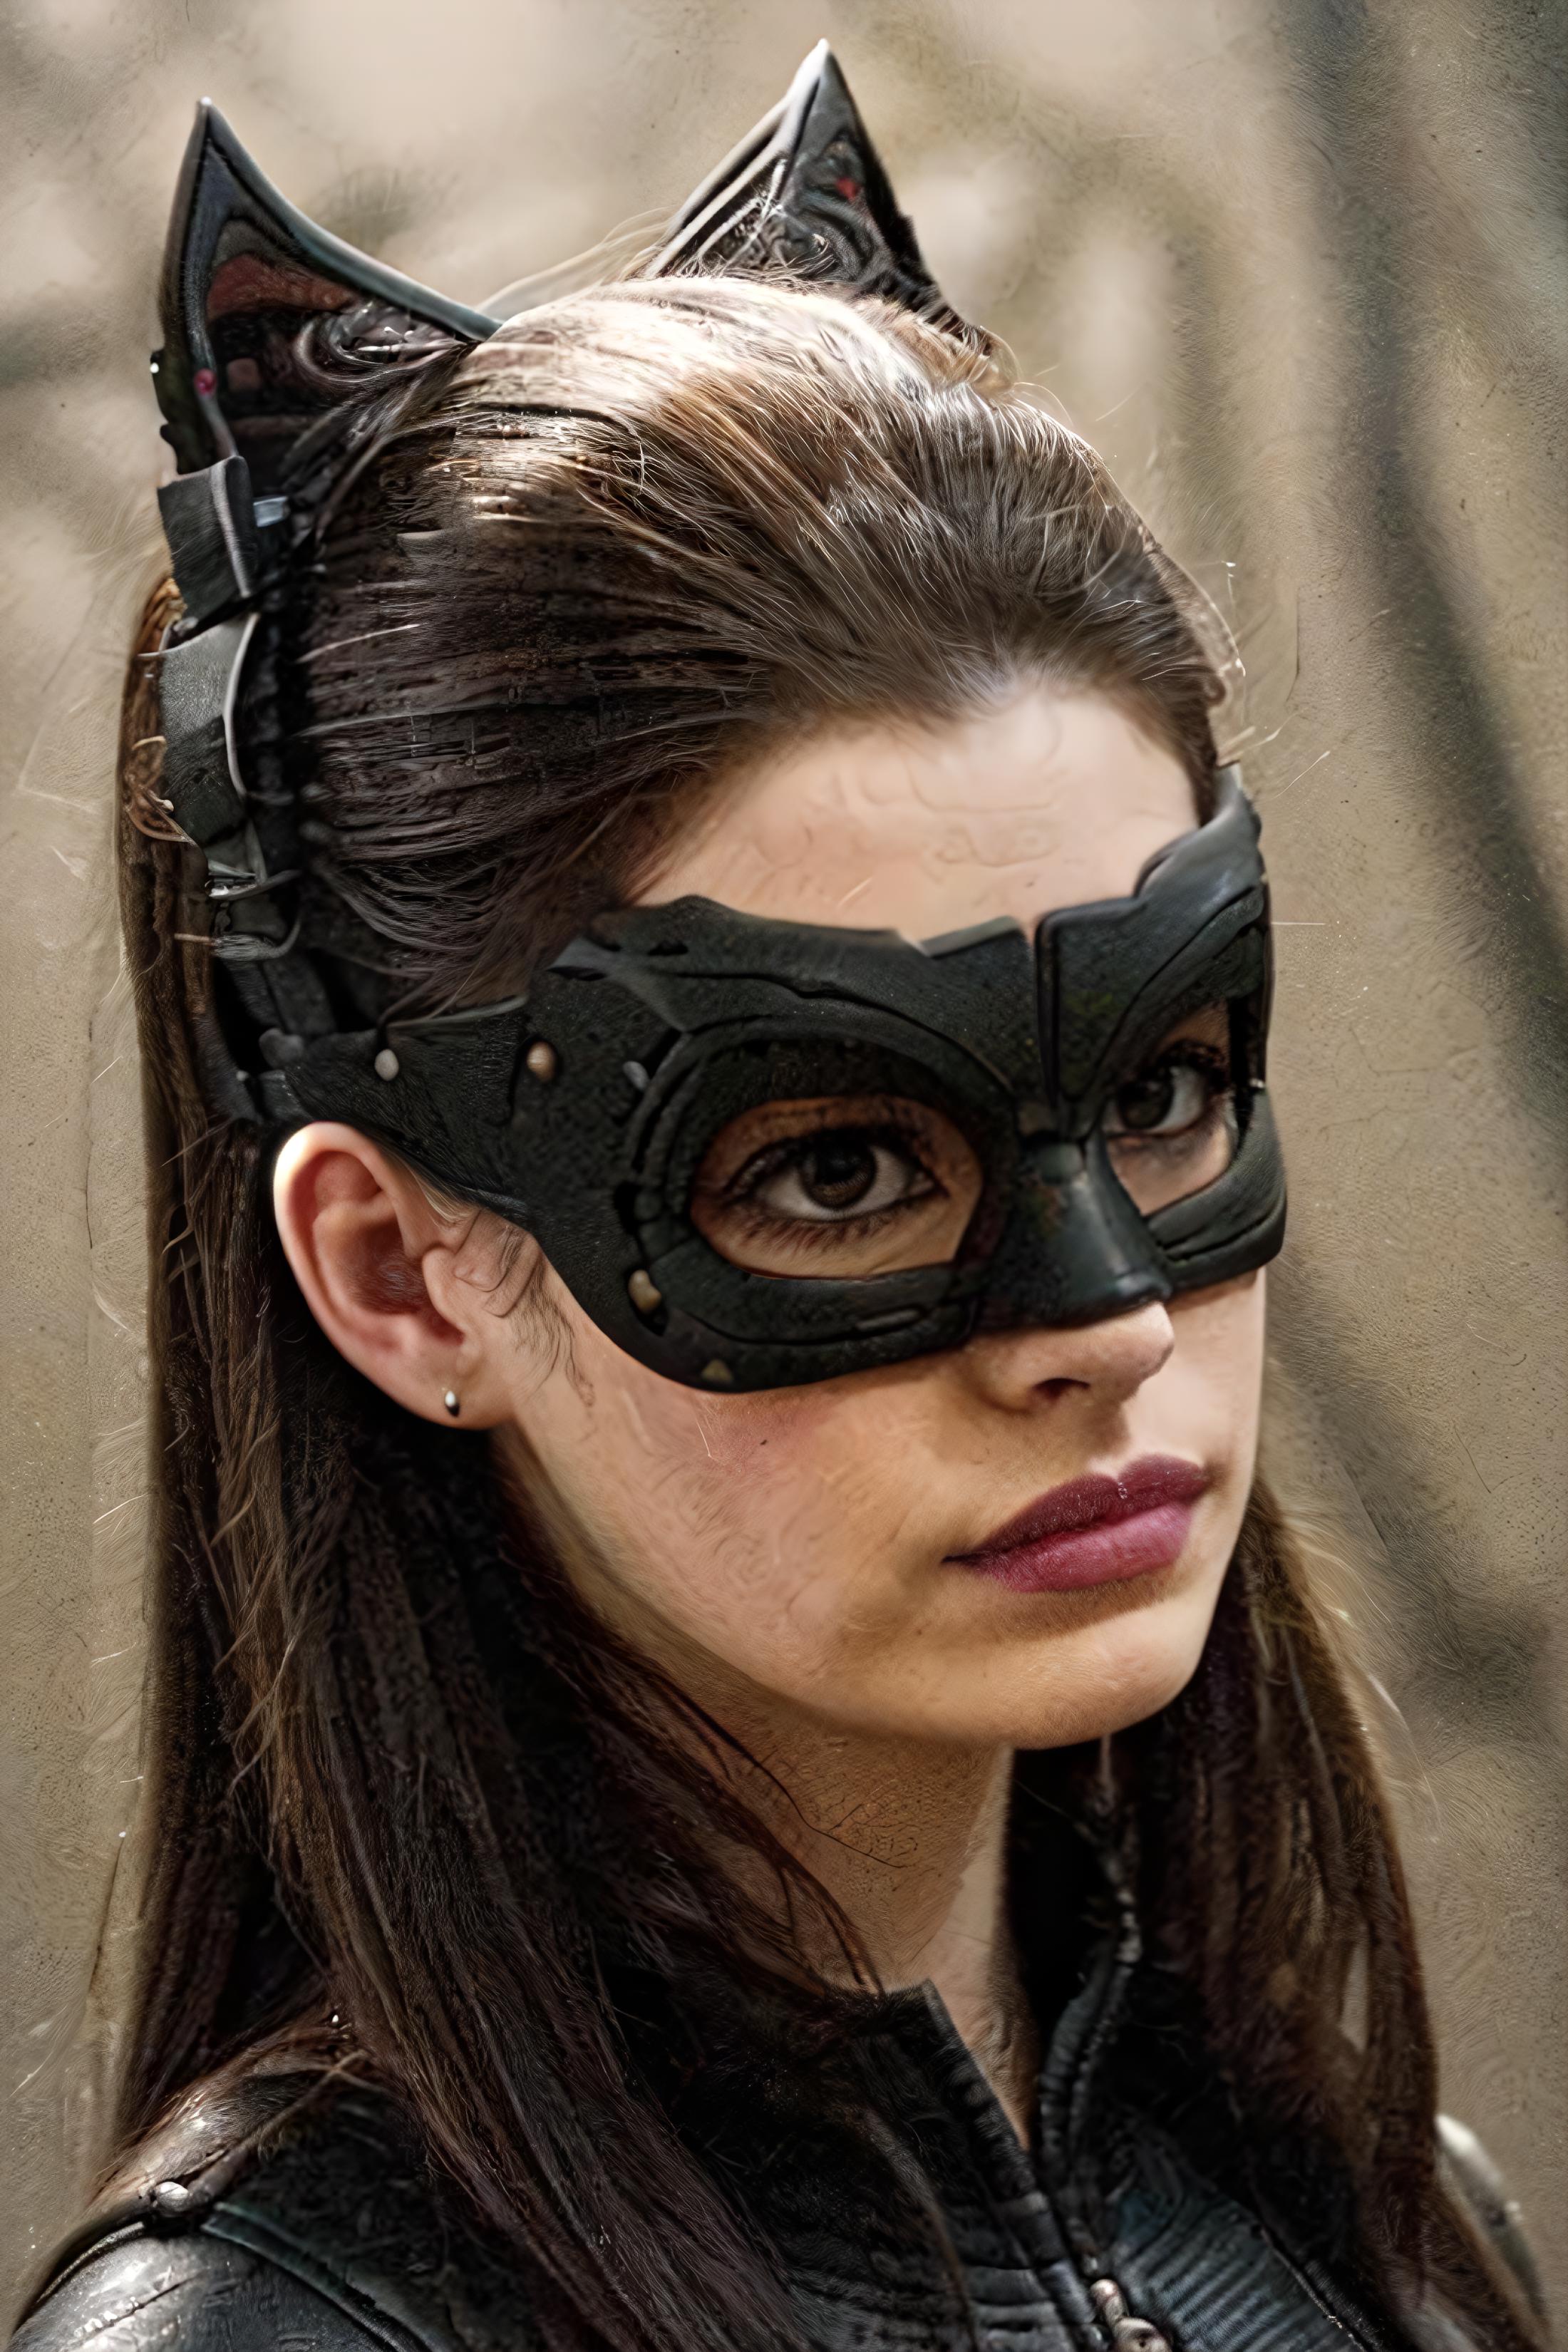 Anne Hathaway / Catwoman image by __2_